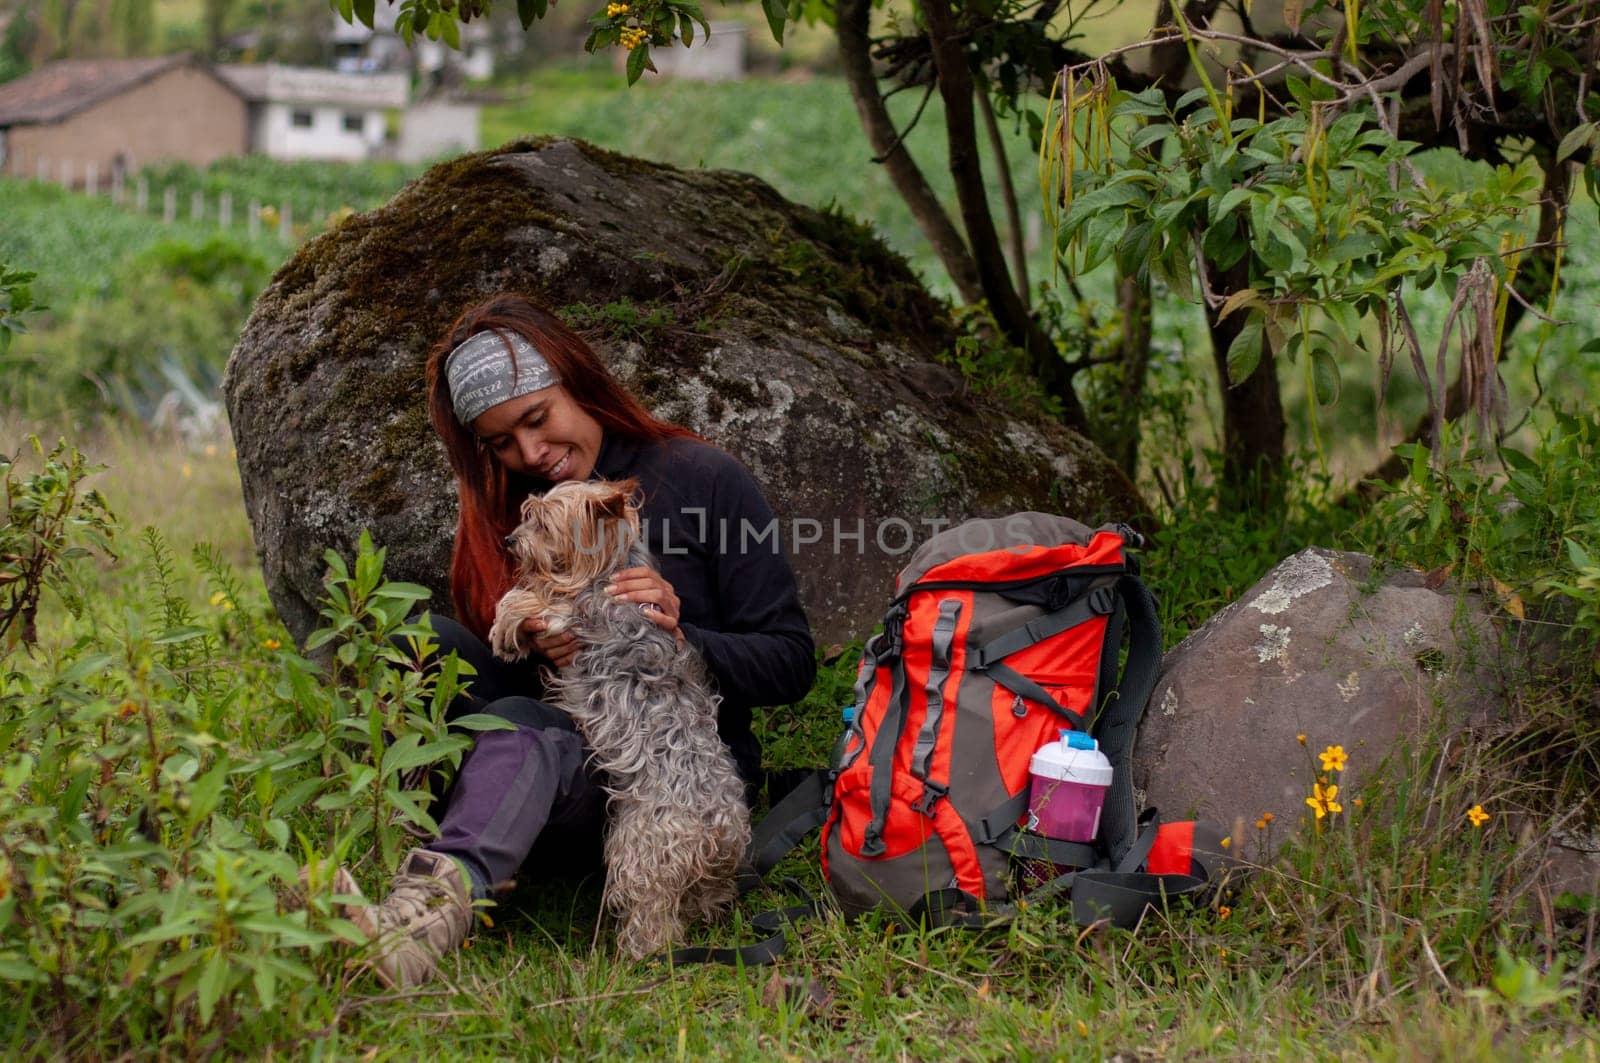 trekking lover girl resting leaning on a rock playing with her dog next to her backpack. by Raulmartin